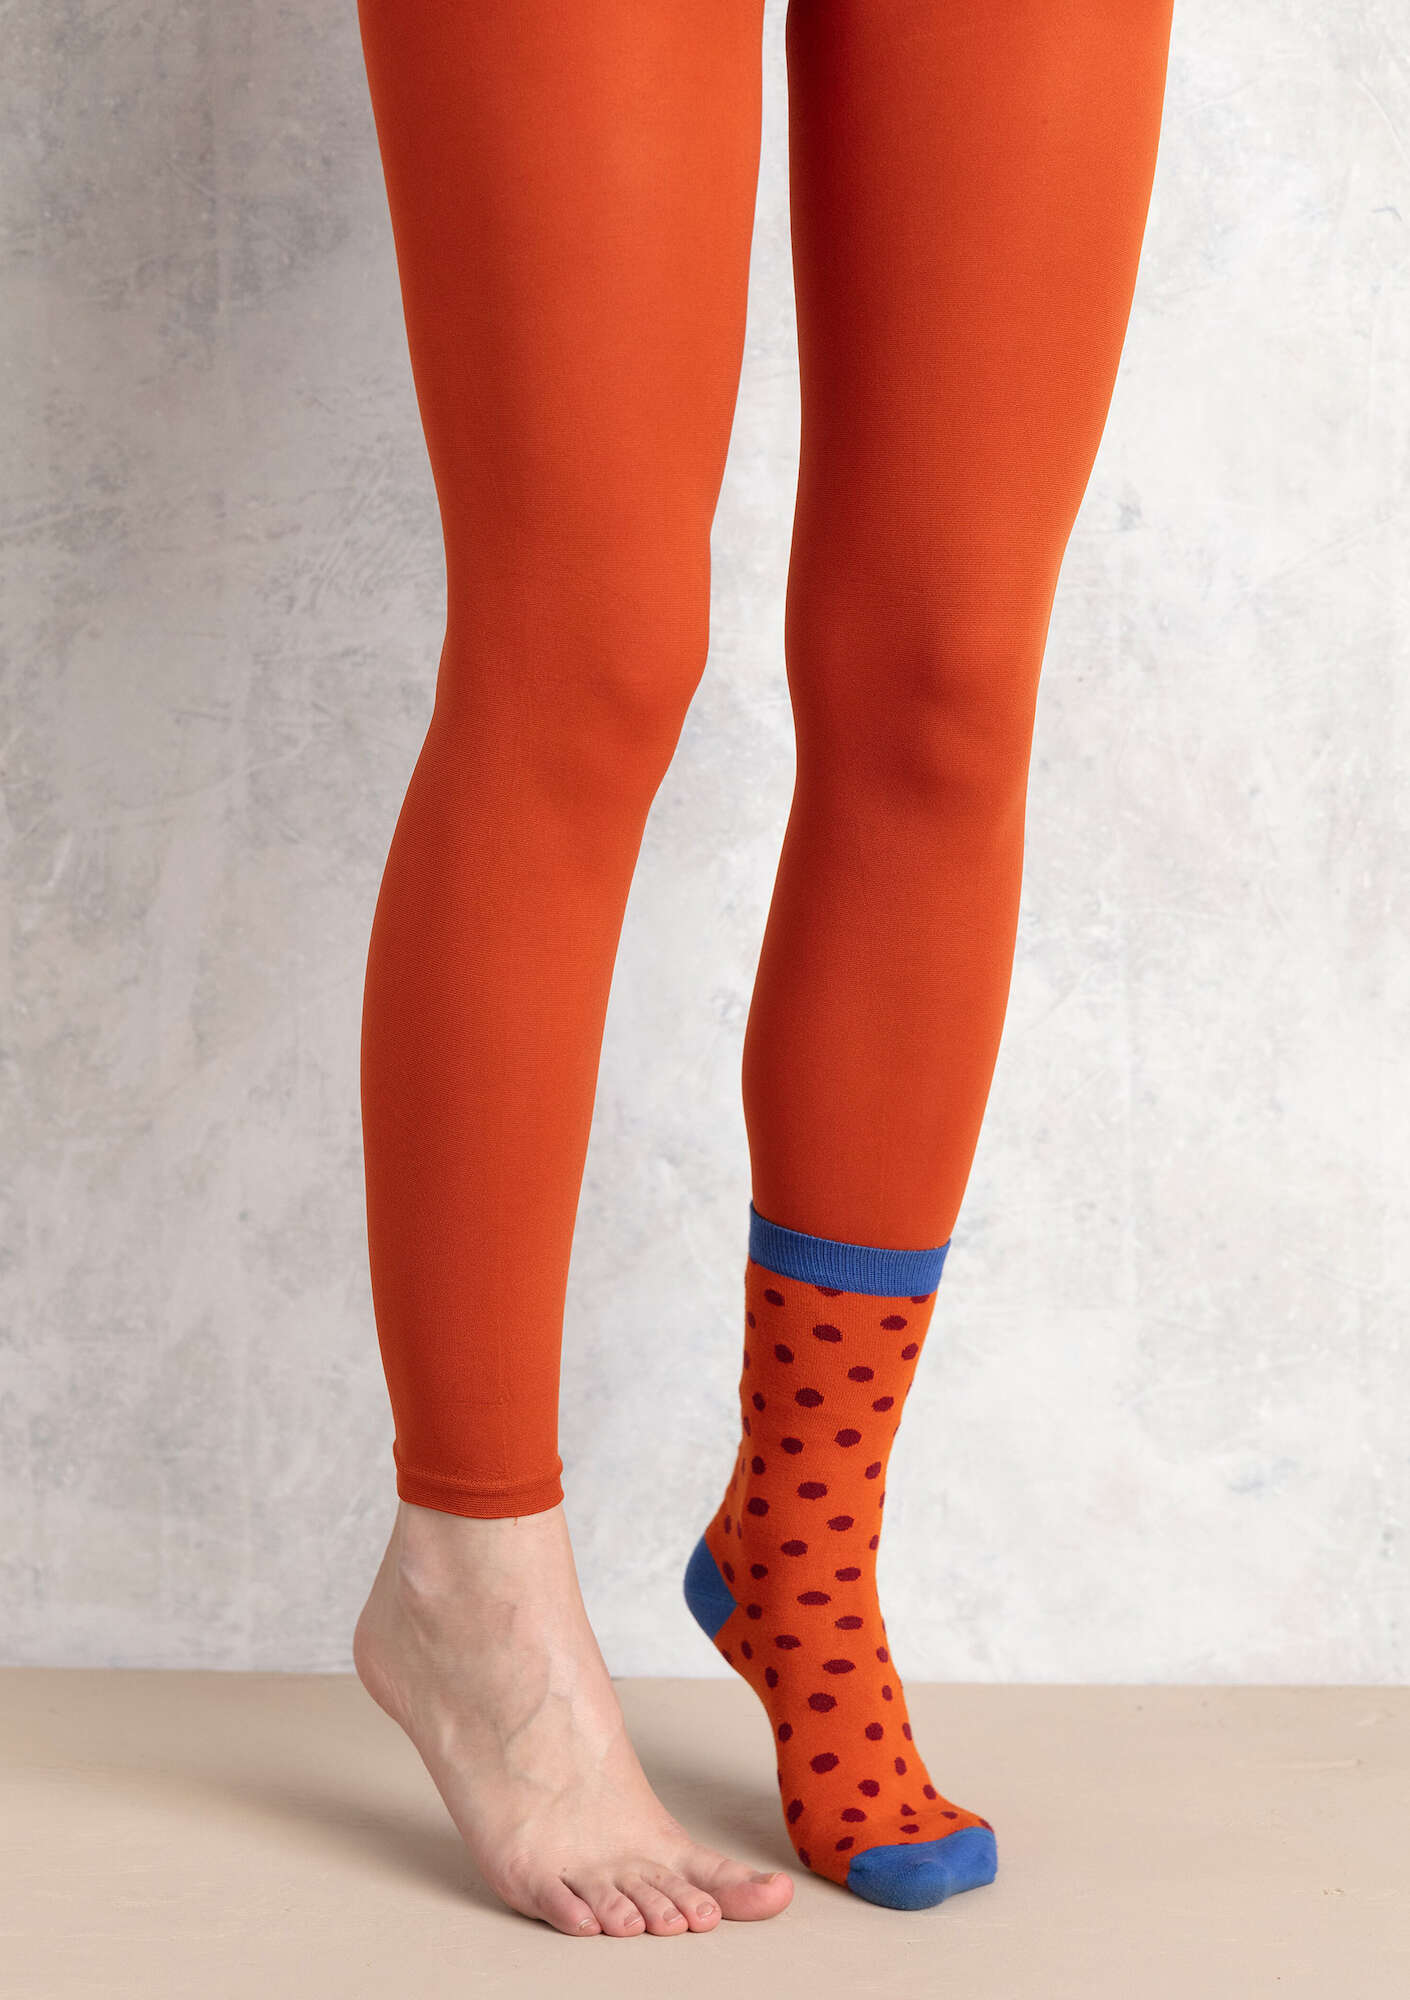 Solid-colored leggings henna